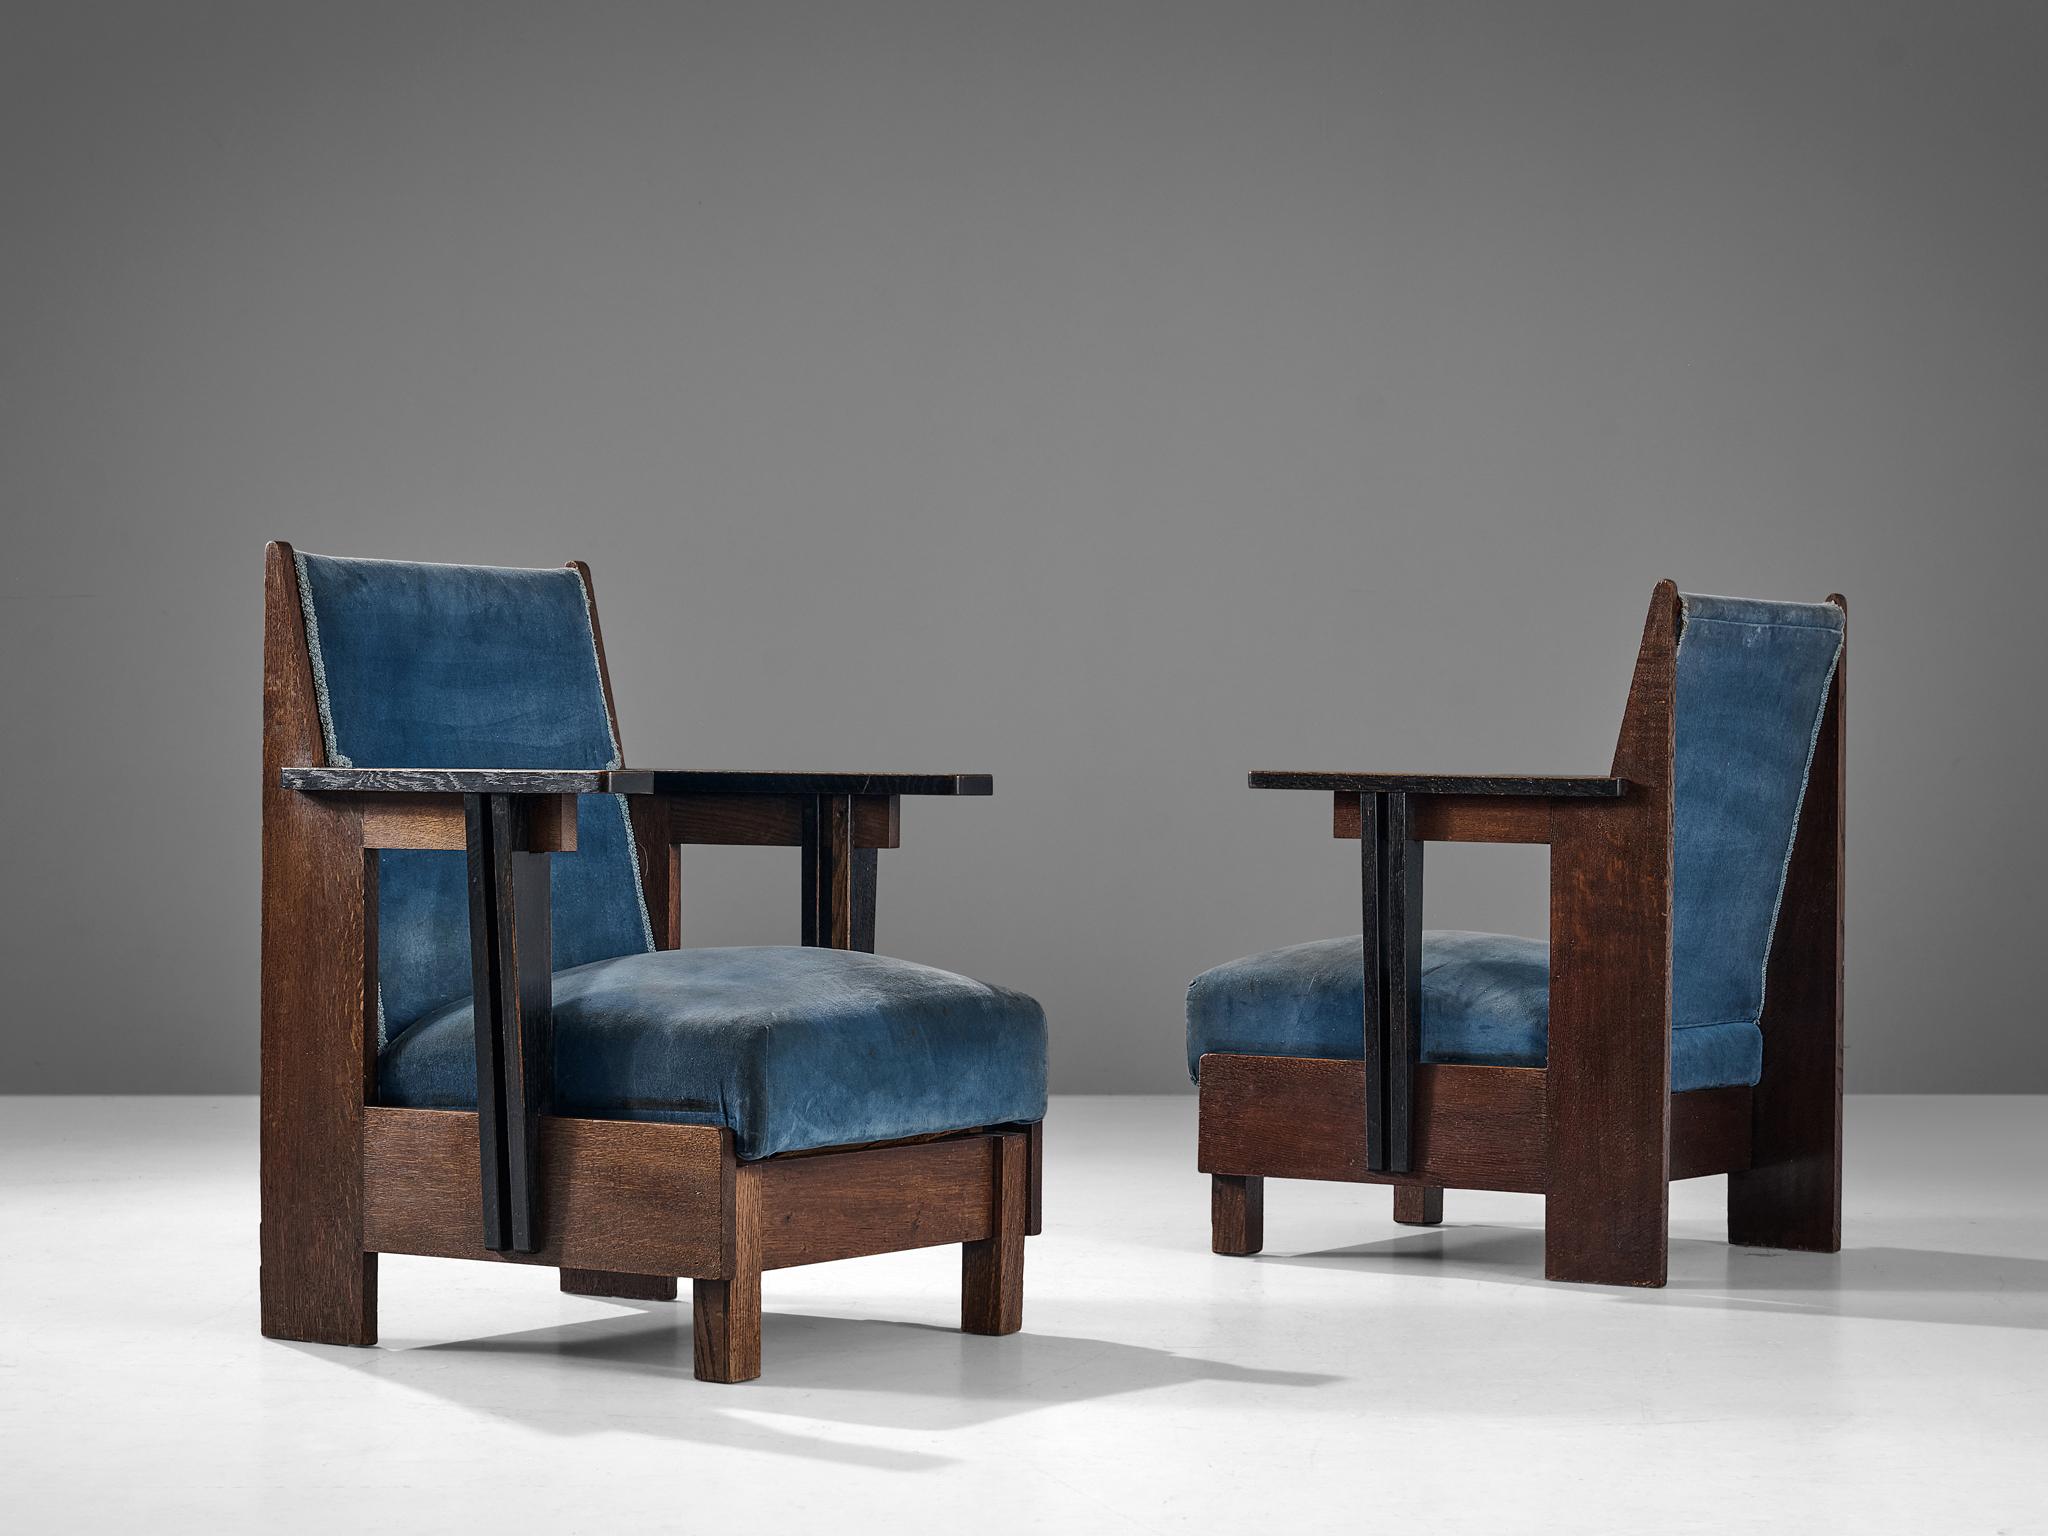 Pair of armchairs, oak, velvet, The Netherlands, 1930s

These Dutch Art Deco pair of easy chairs bear strong traits of the aesthetic language of the 'Hague School' from the Interbellum. During this period between two world wars, this modern style of